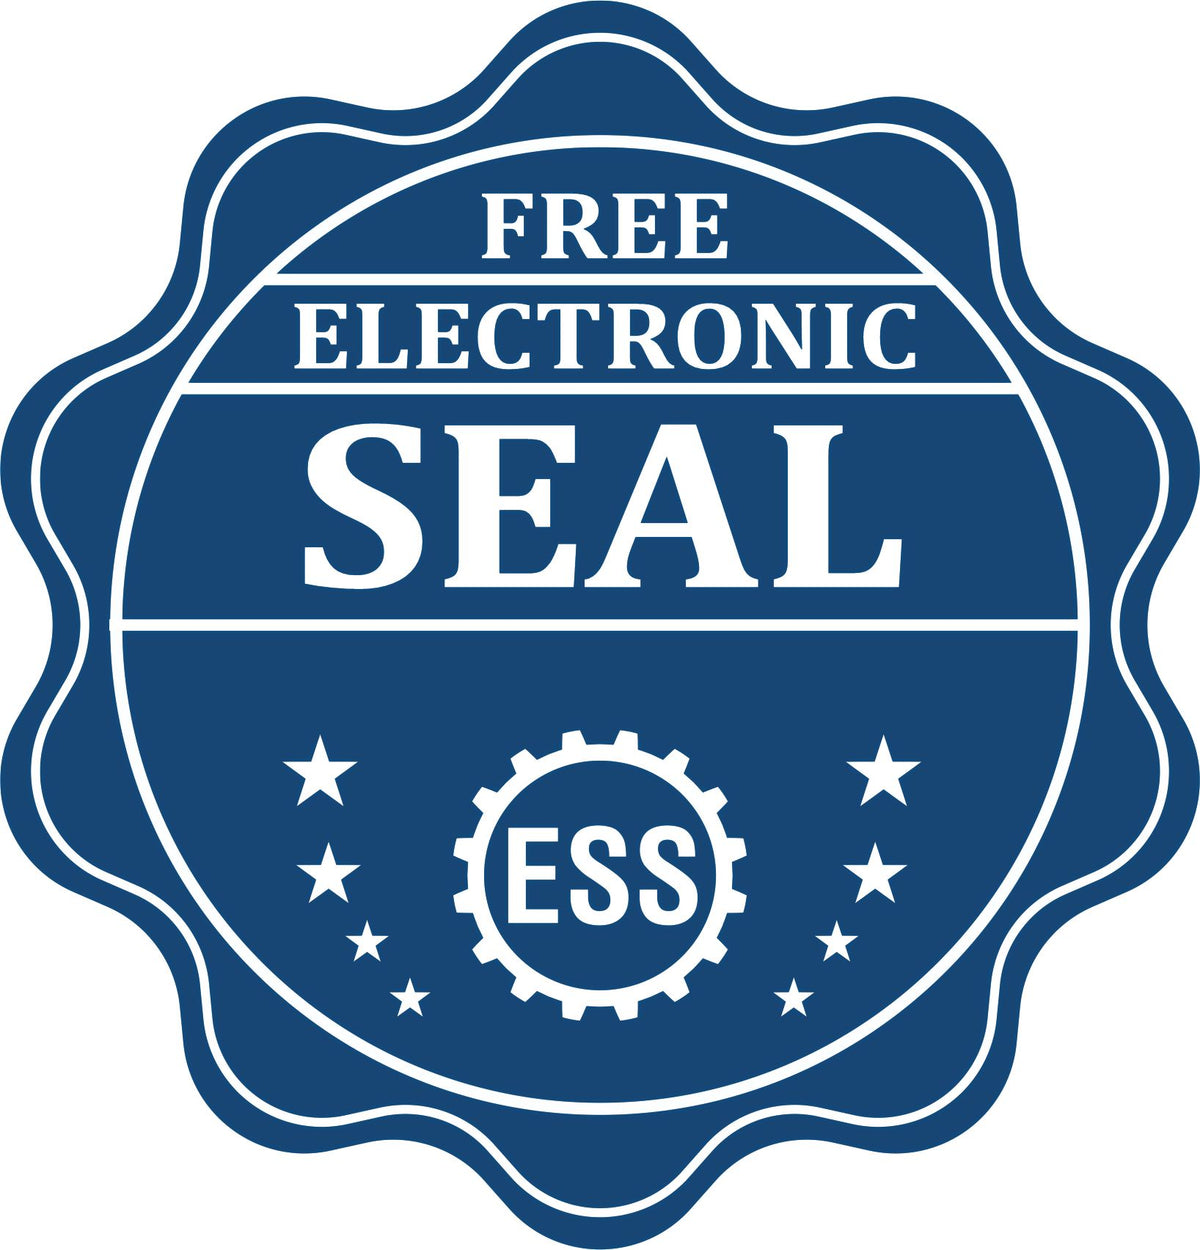 A badge showing a free electronic seal for the Slim Pre-Inked Washington Landscape Architect Seal Stamp with stars and the ESS gear on the emblem.